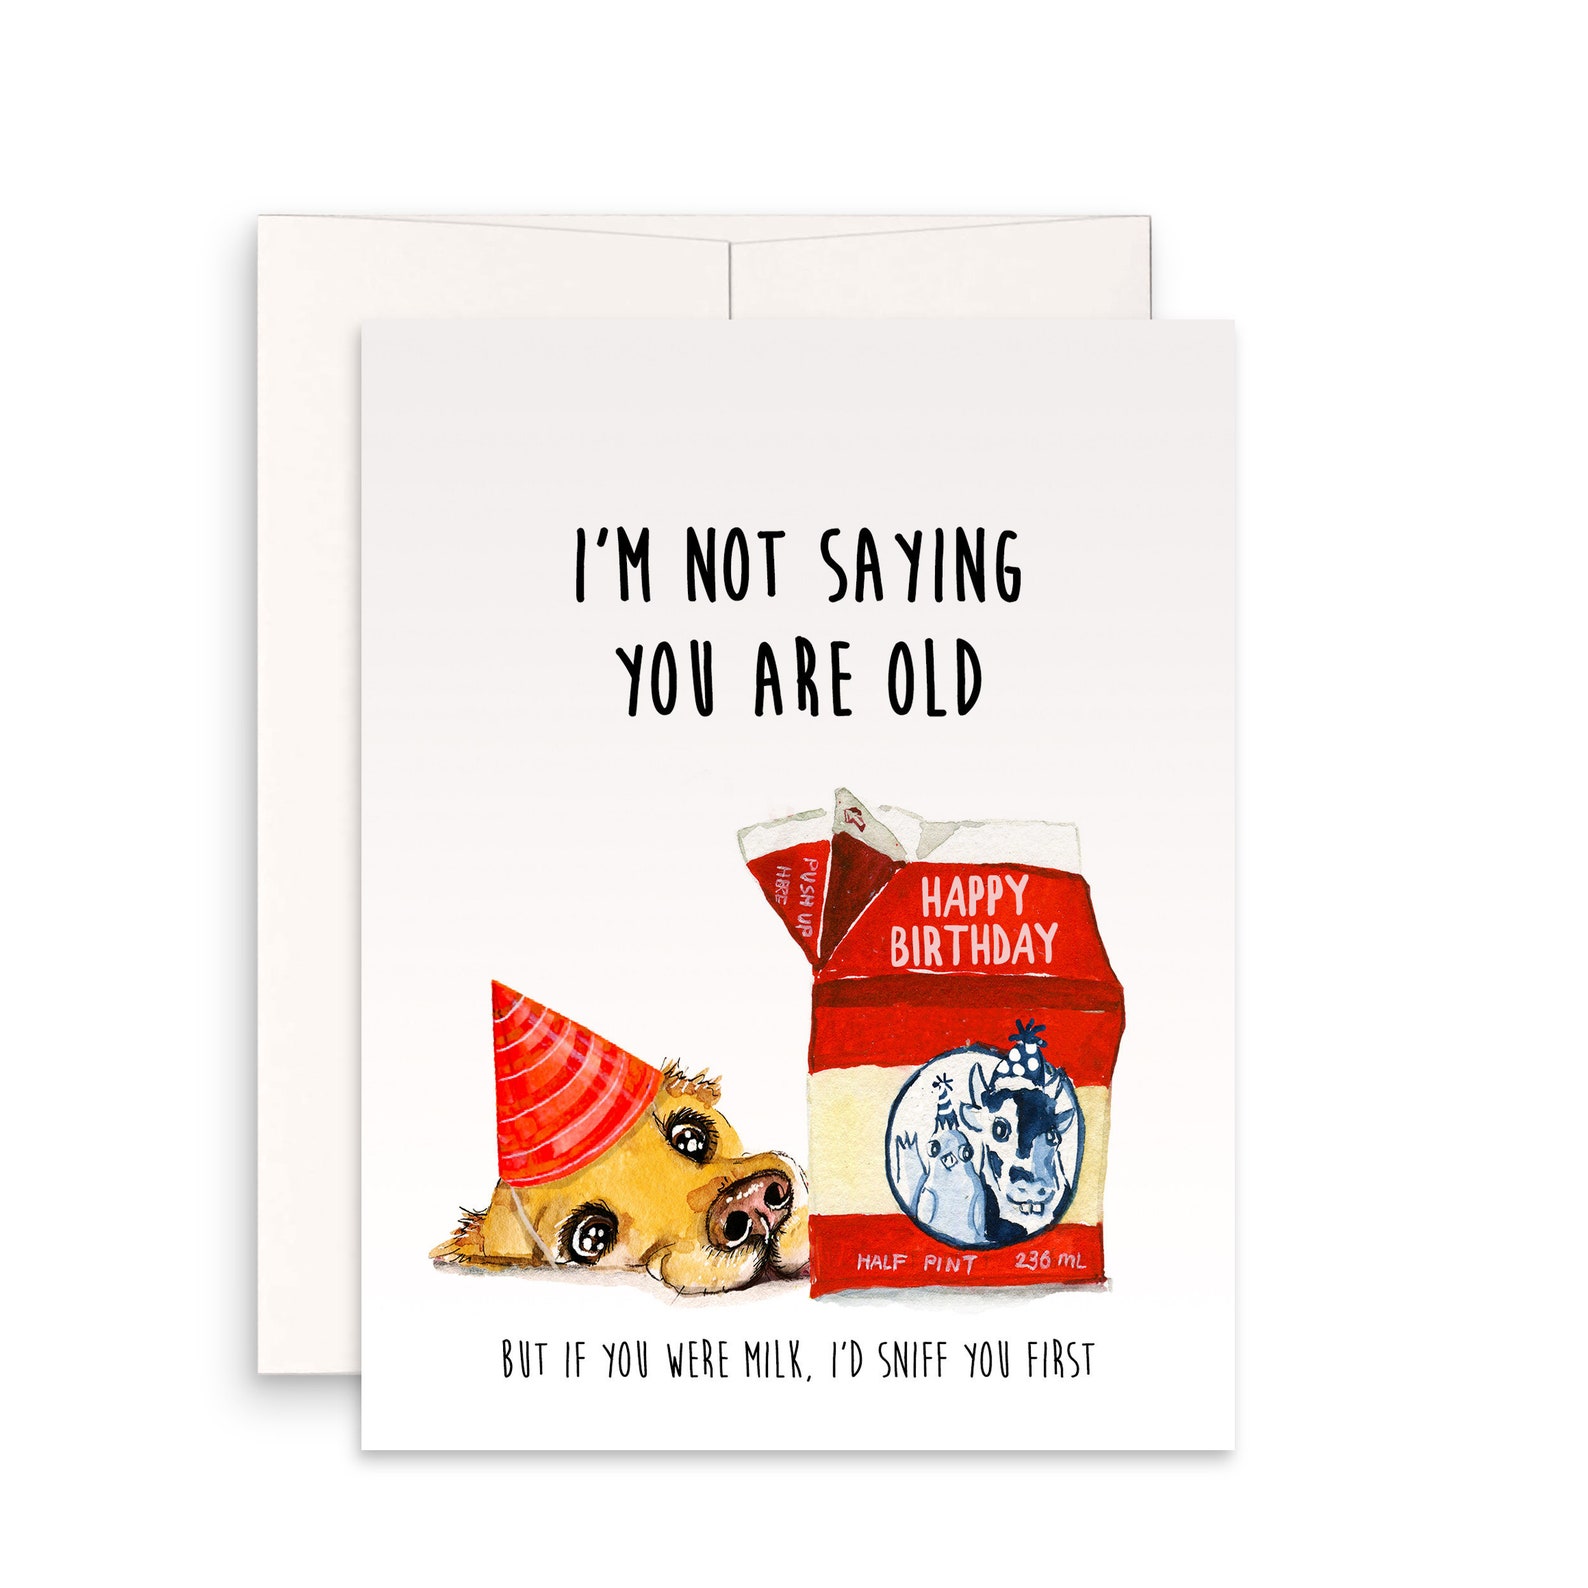 Old Milk Rude Birthday Card Funny Not Saying You Are Old - Etsy